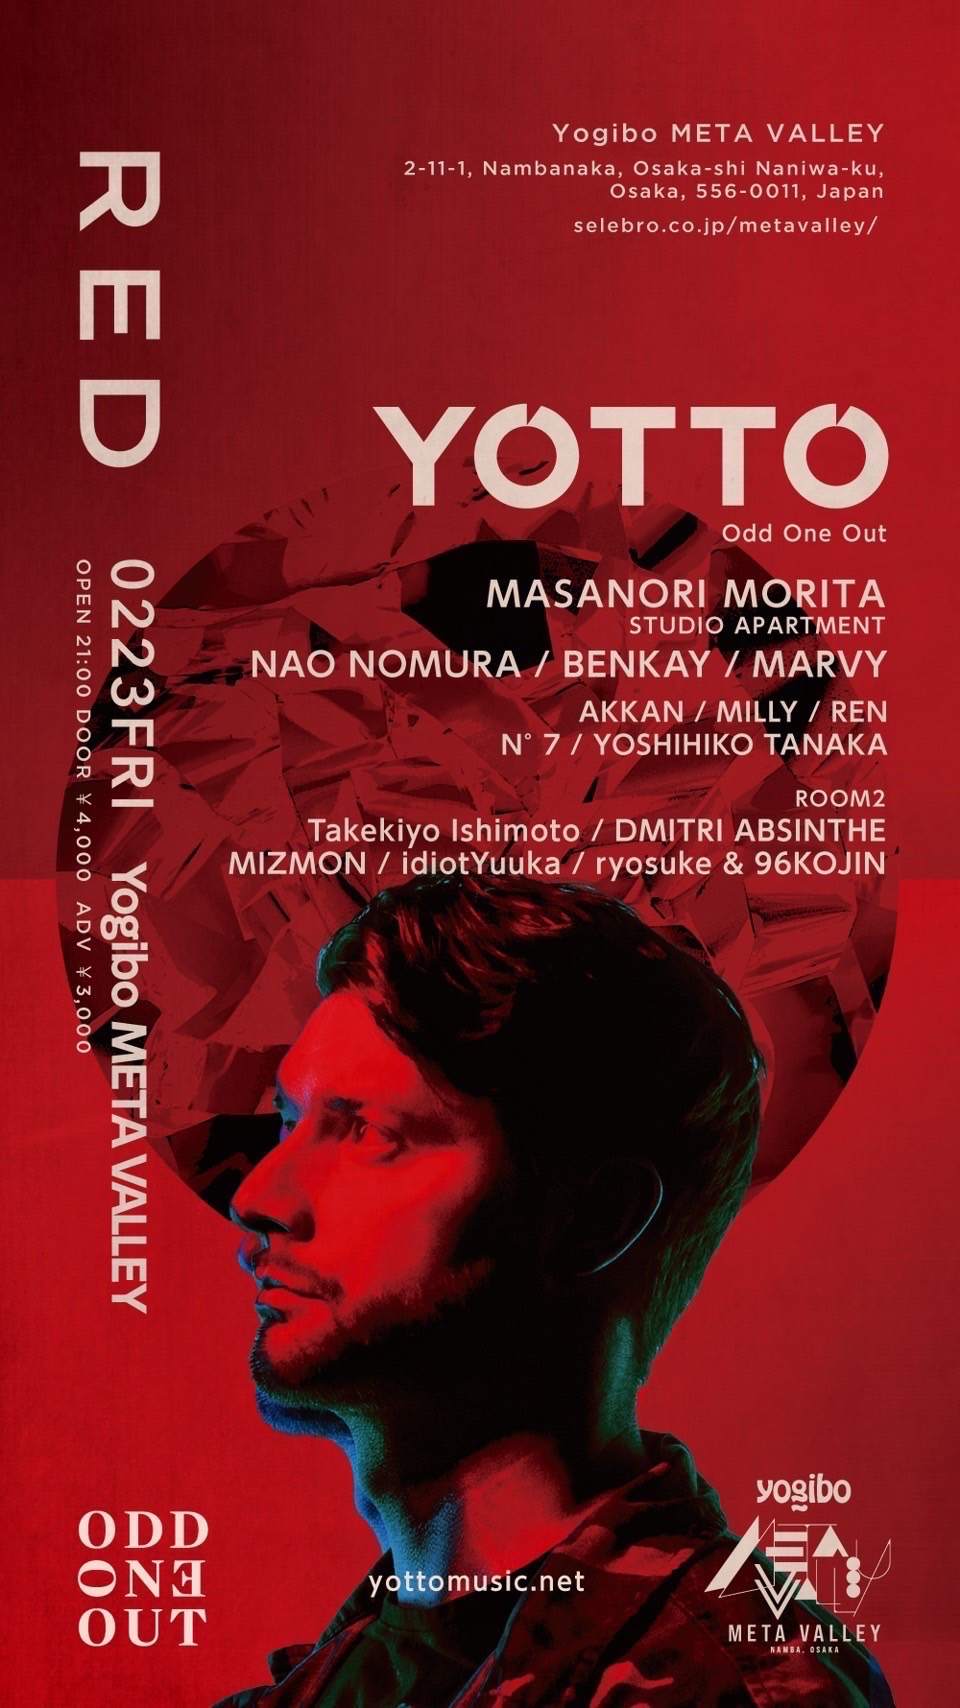 RED Yotto ODD ONE OUT JAPAN TOUR - フライヤー表